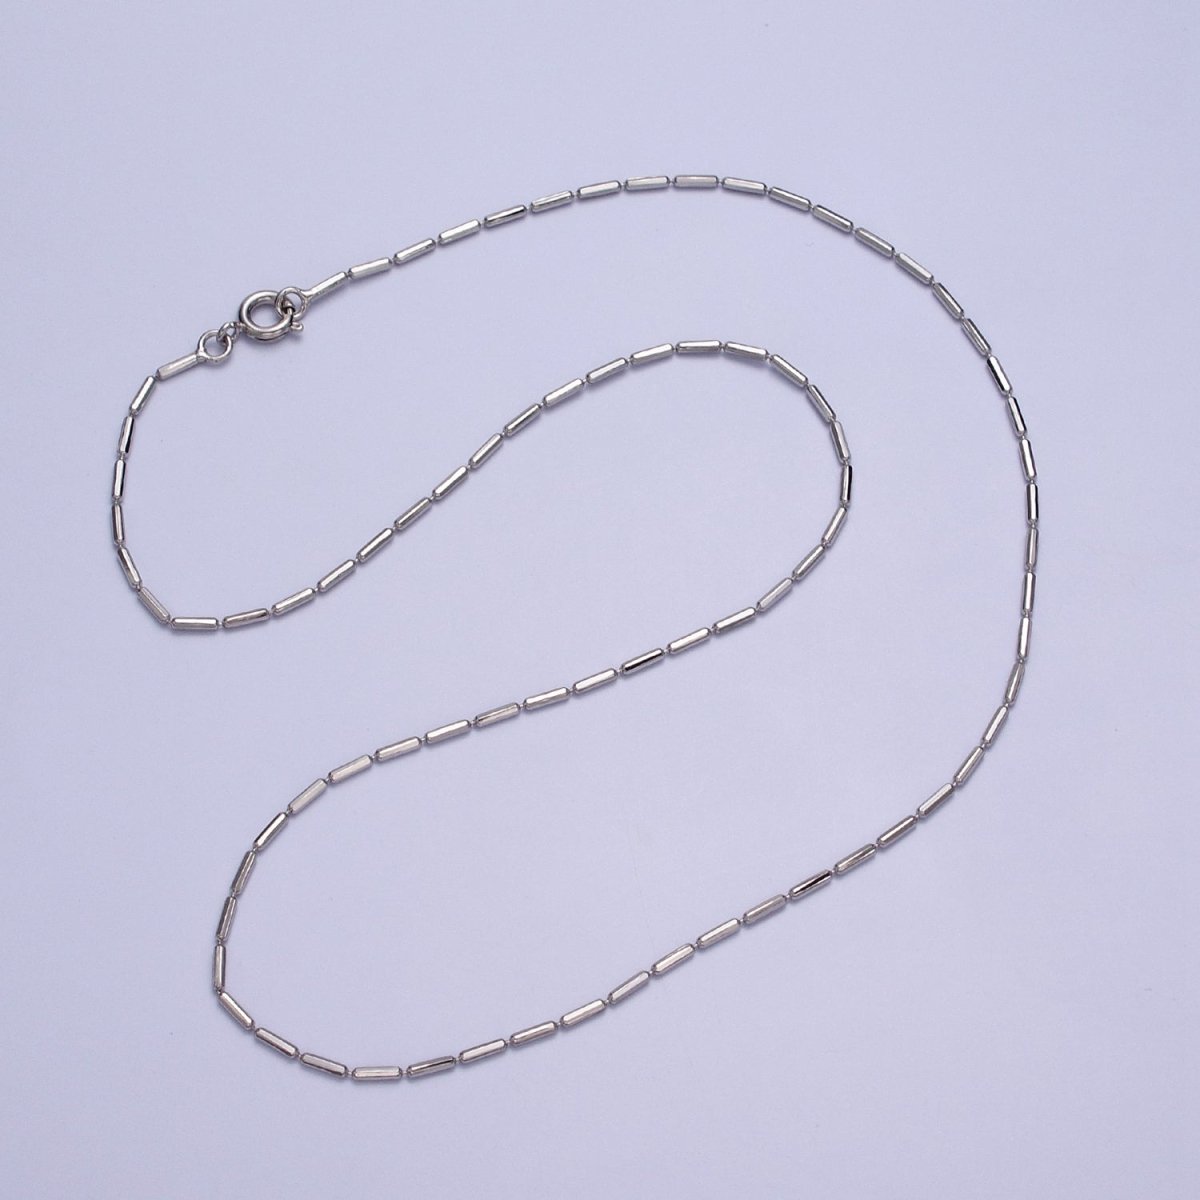 17.75 Inch Tube Chain Silver Dainty Tube Cable Link Necklace Ready to Wear for Jewelry Making w/ Clasp for Jewelry Making Supply | WA-1593 Clearance Pricing - DLUXCA